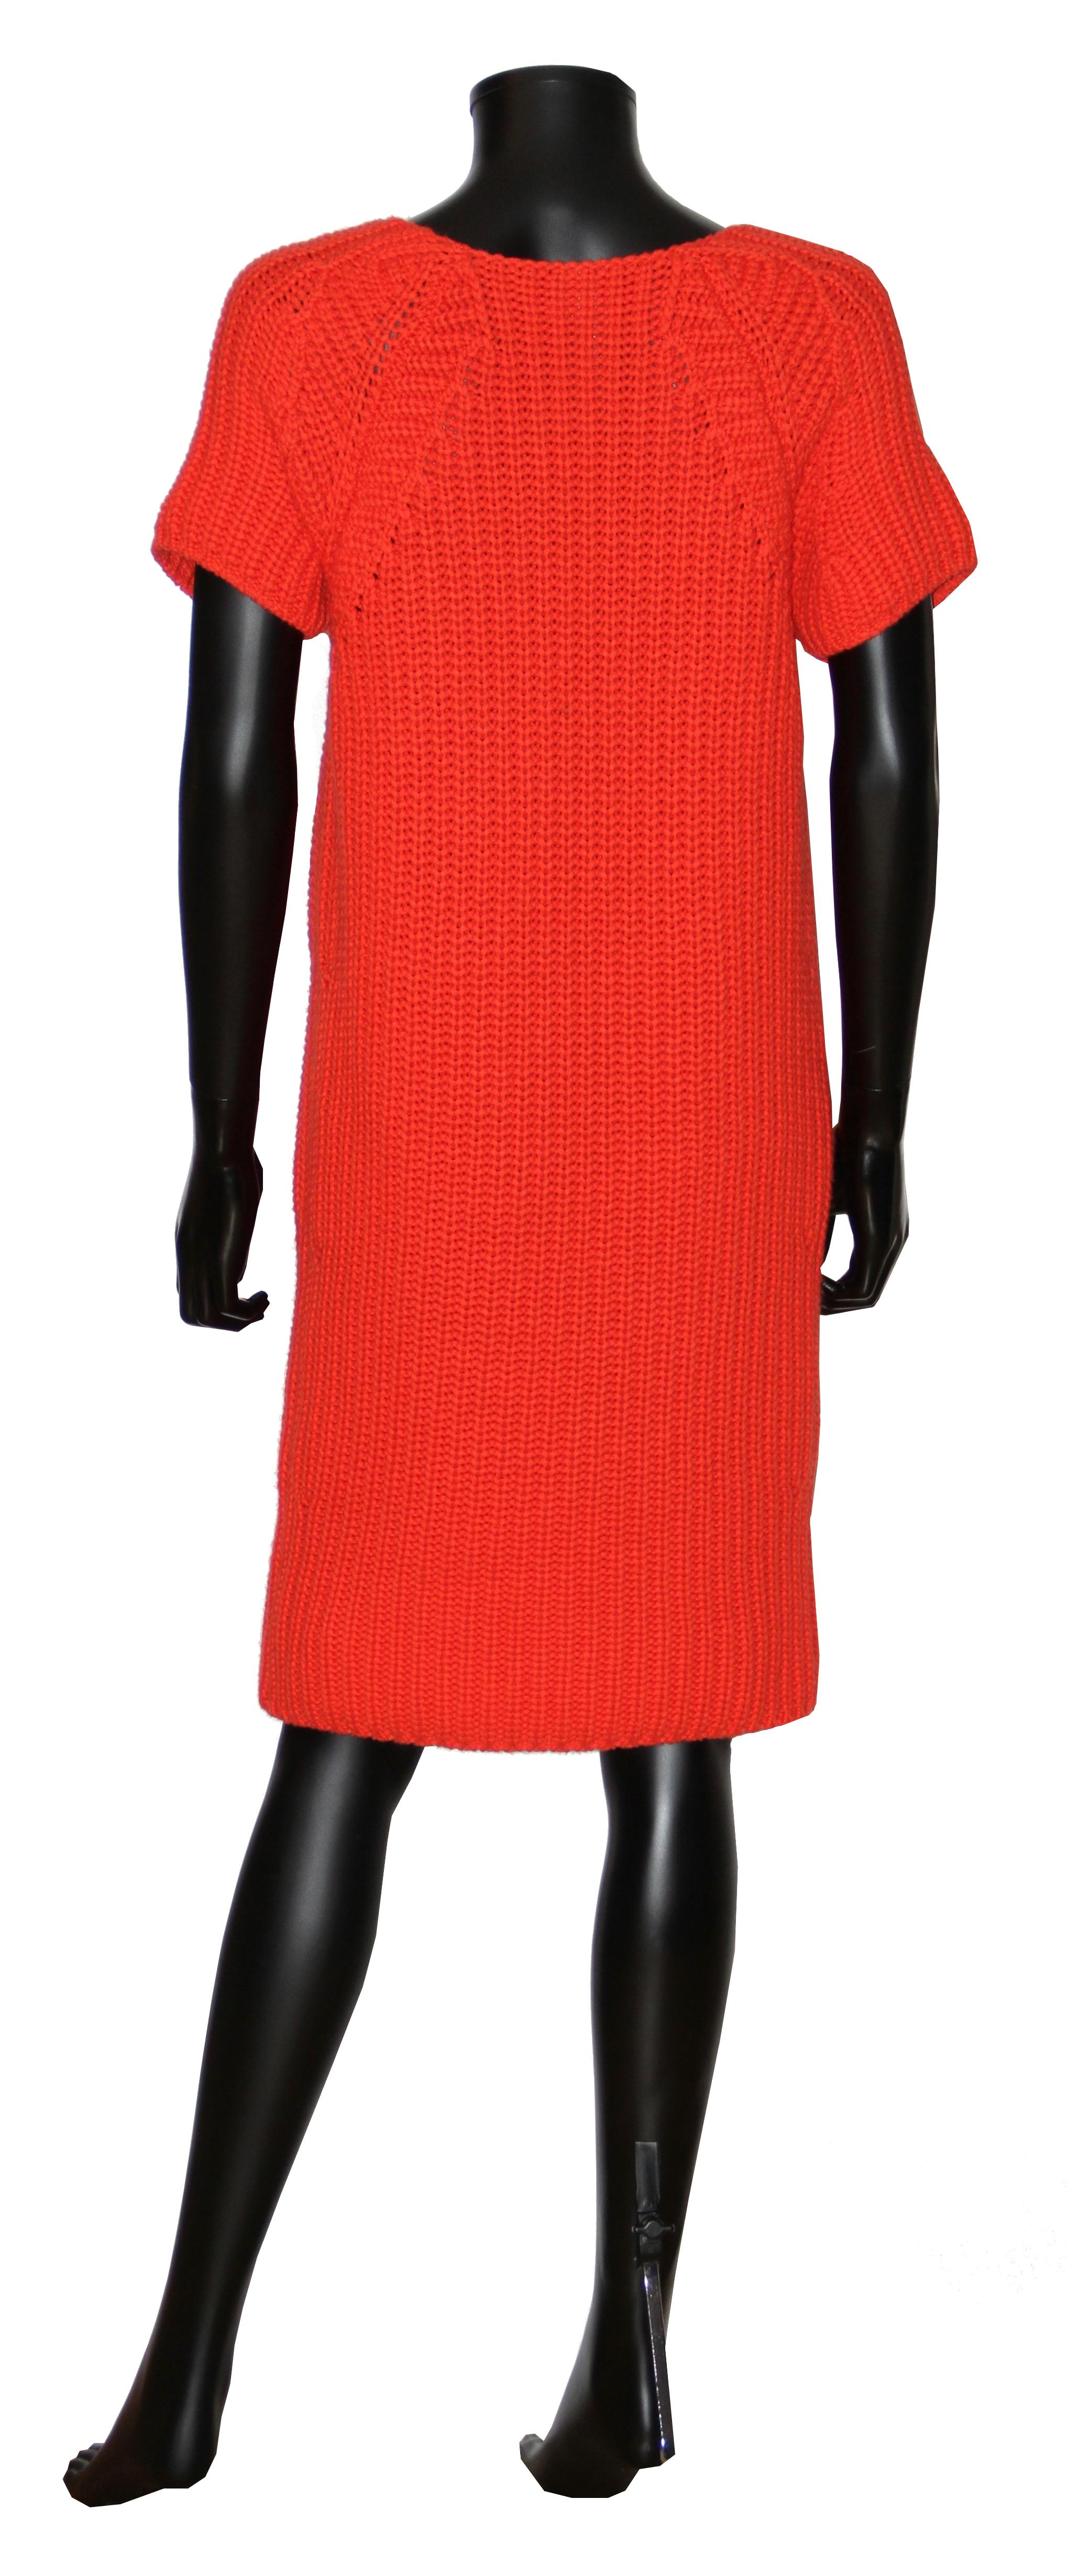 This dress is a classic understated piece from Hermes.
It features a boat neck line and the length is just above the knee  
Its knit gives some elasticity and comfort and is made of a very soft cashmere and coton blend. 

Fabric: 64% cashmere - 36%